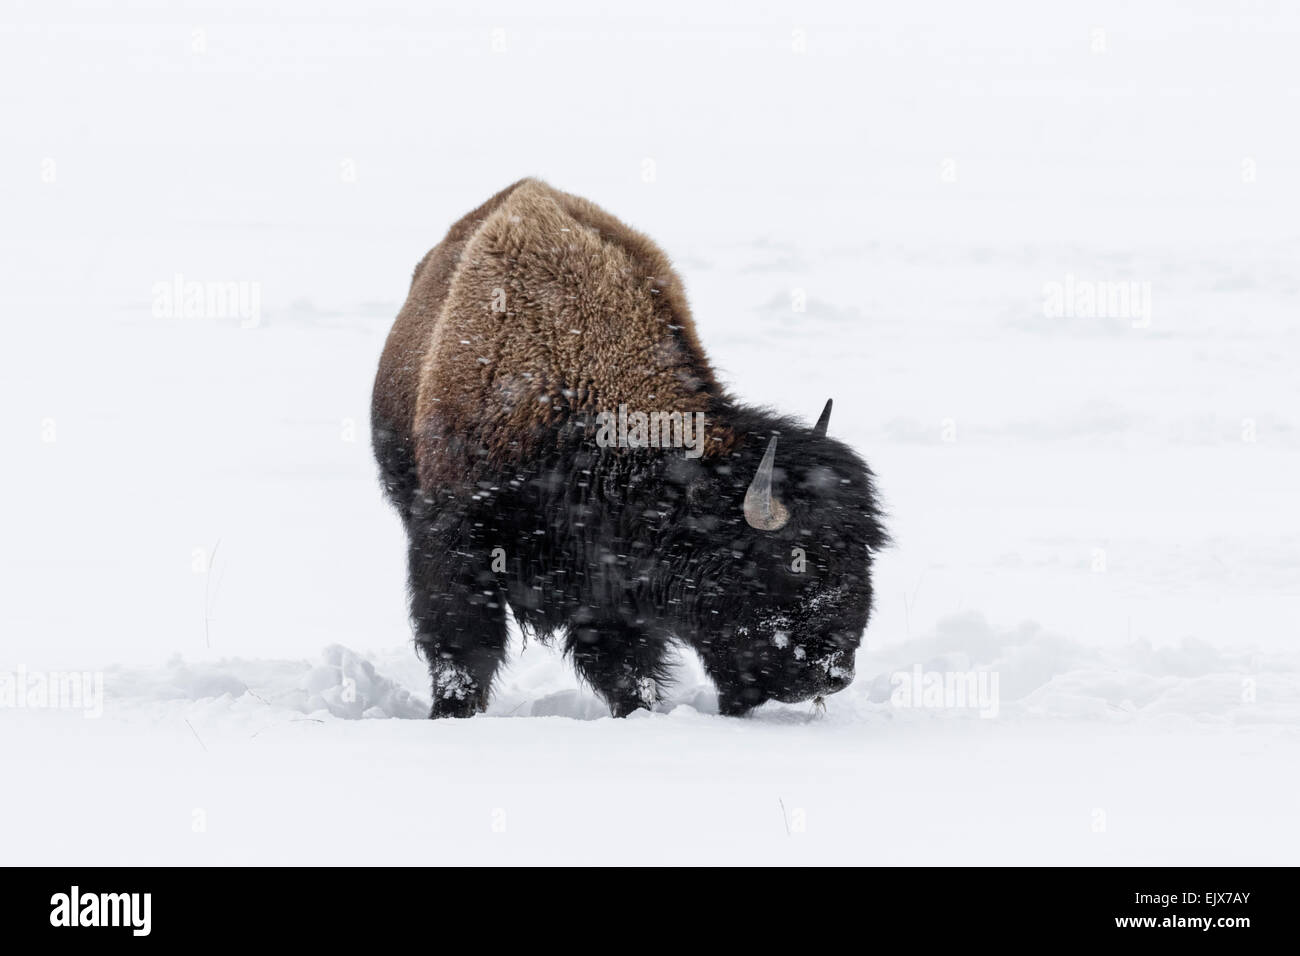 American Bison Stock Photo